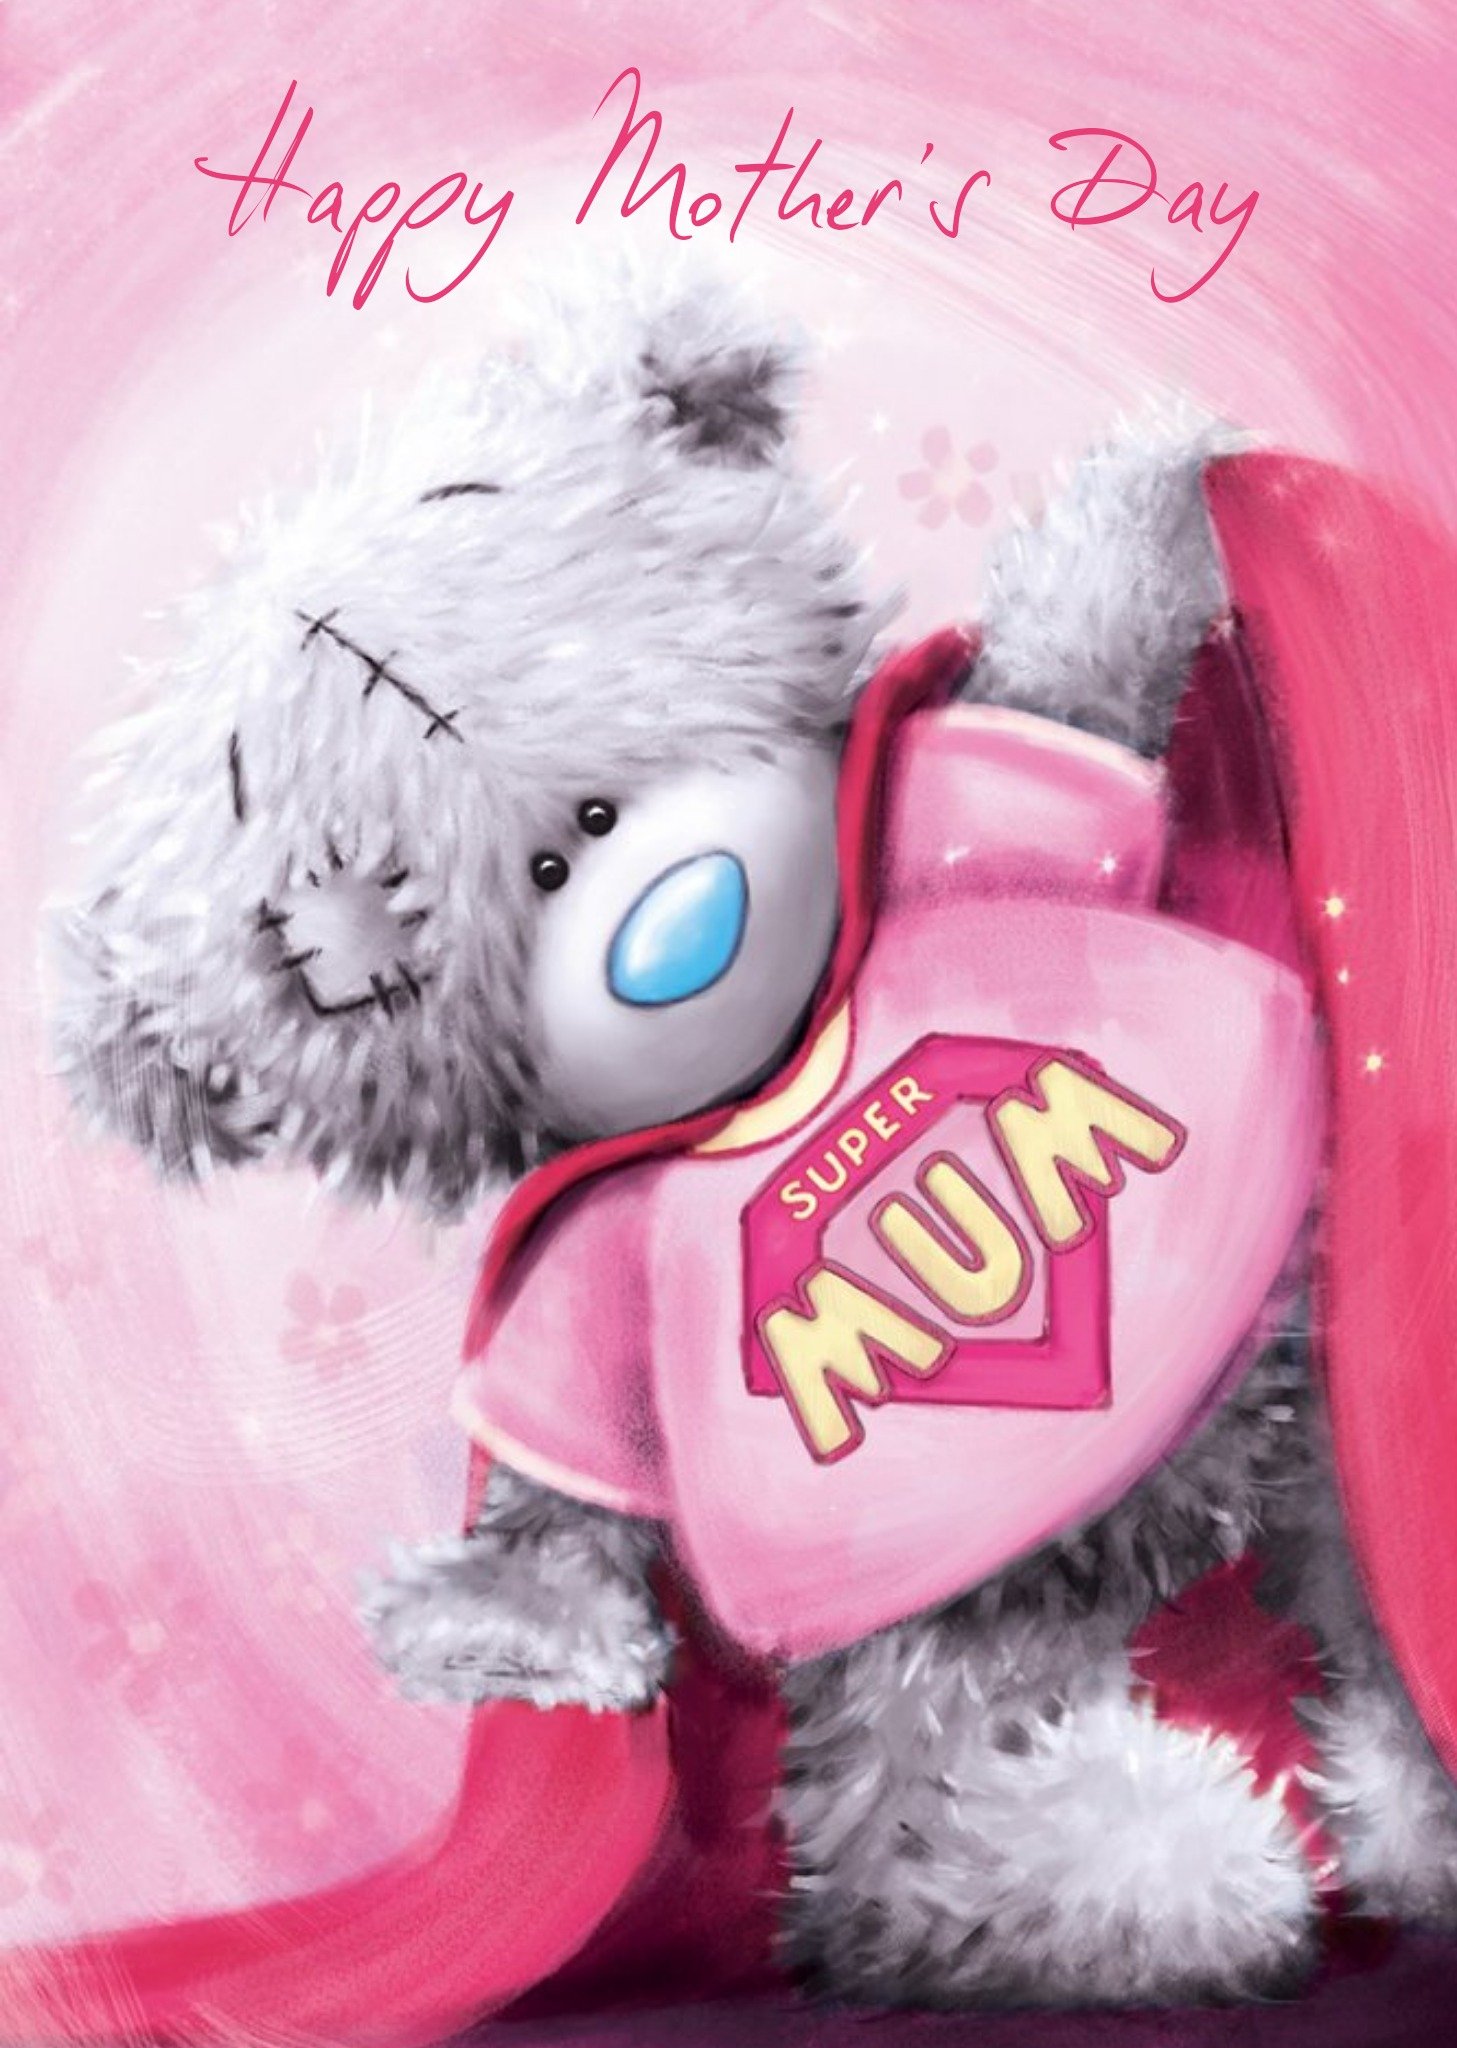 Me To You Mother's Day Card - Tatty Teddy - Super Mum Ecard